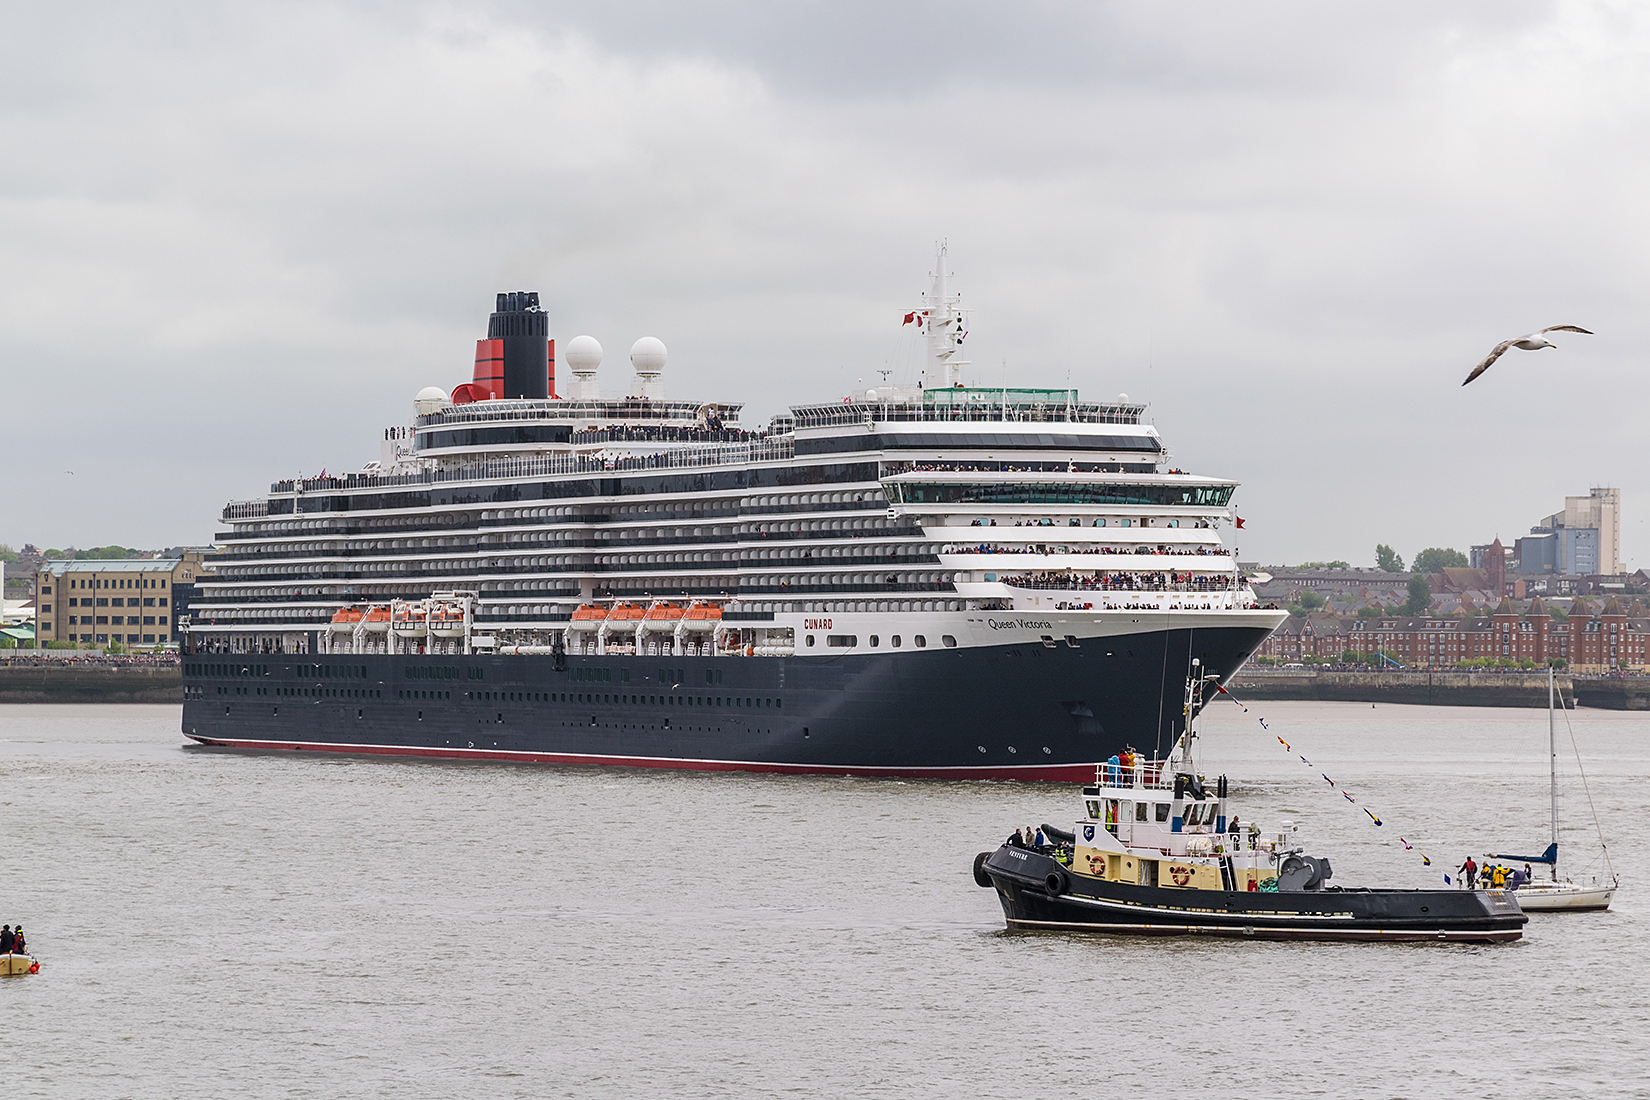 Queen Victoria starts her manouver opposite the Liverpool Echo Arena